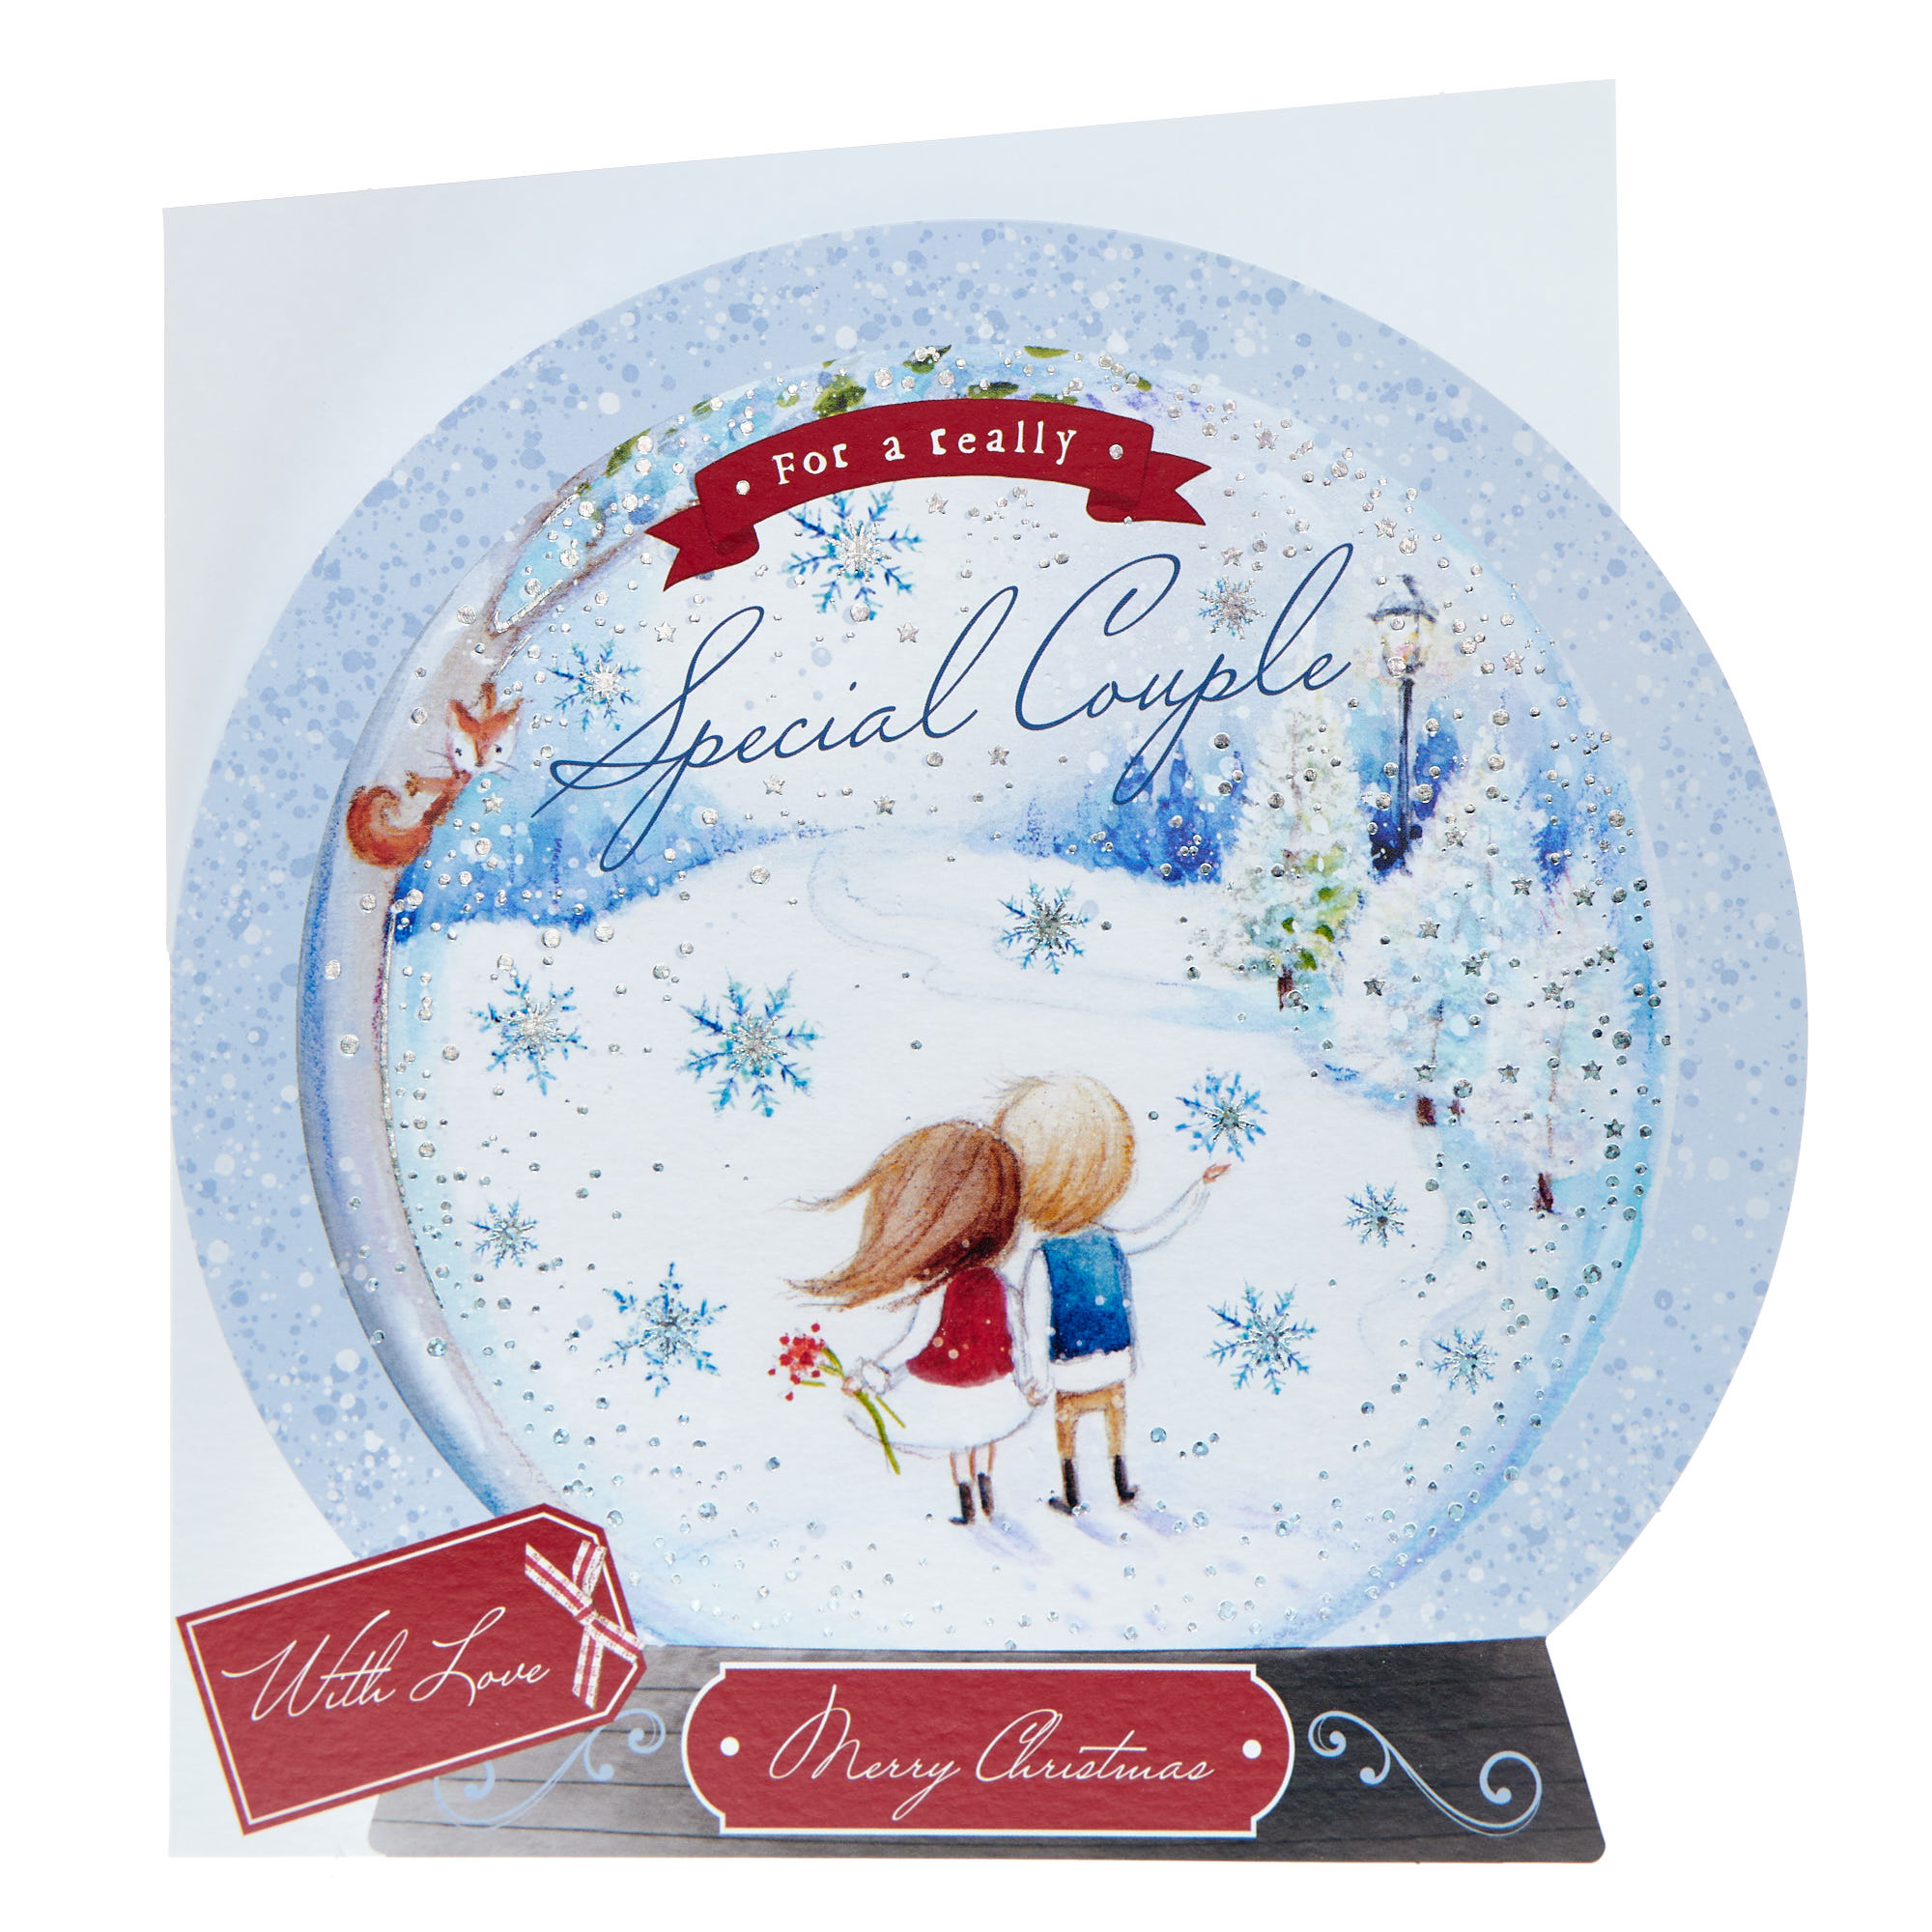 Special Couple Snowglobe Christmas Card